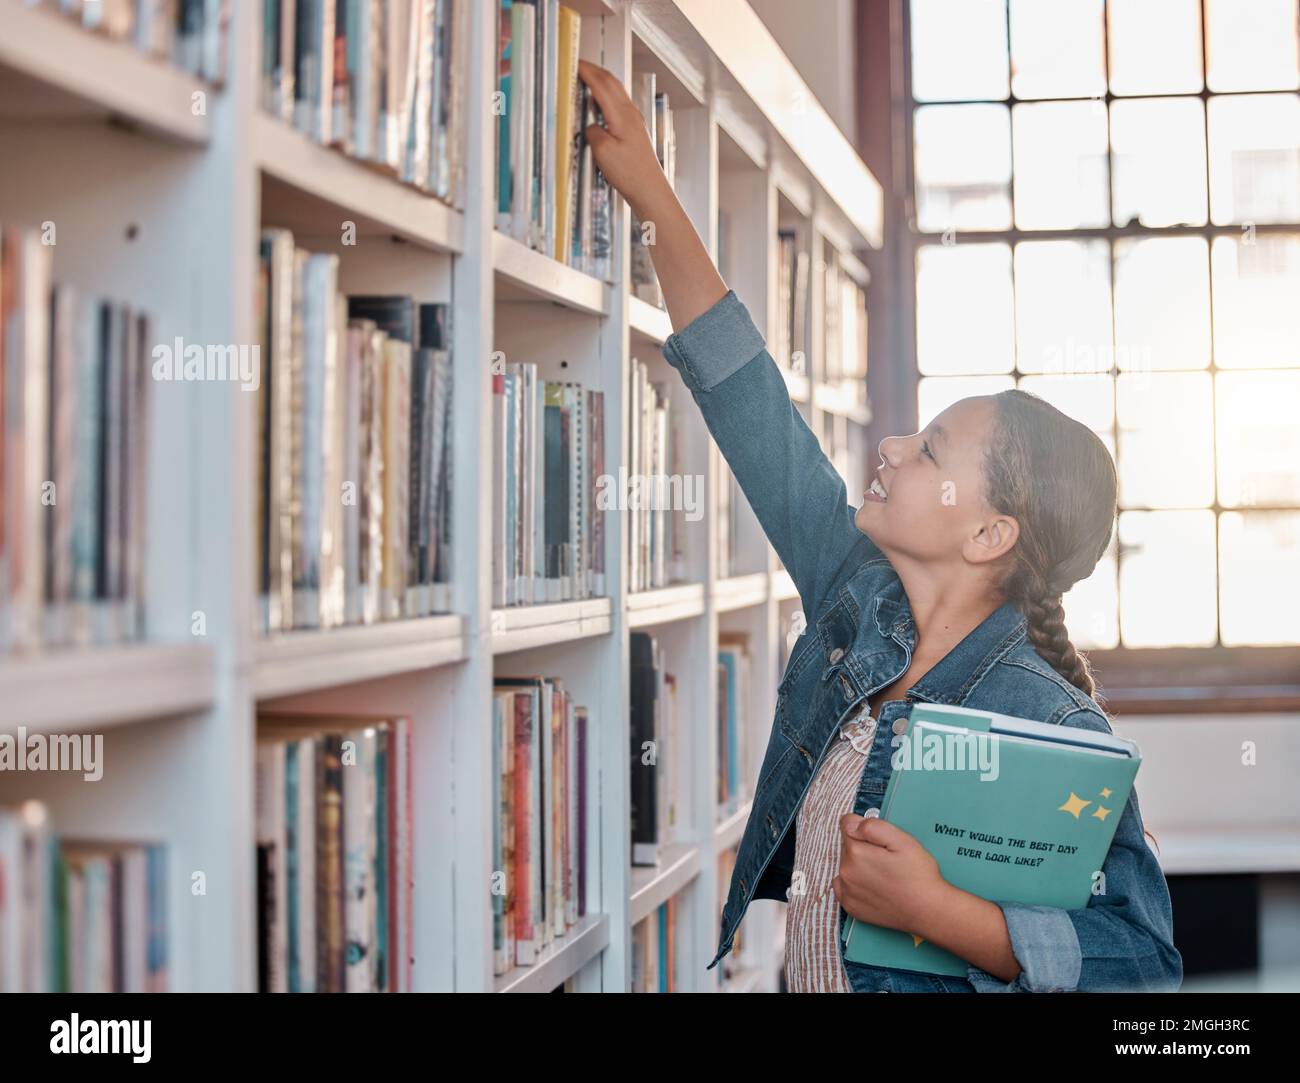 Books, education or child in a library to search for knowledge or development for future learning. Hand reaching, student growth or happy girl Stock Photo